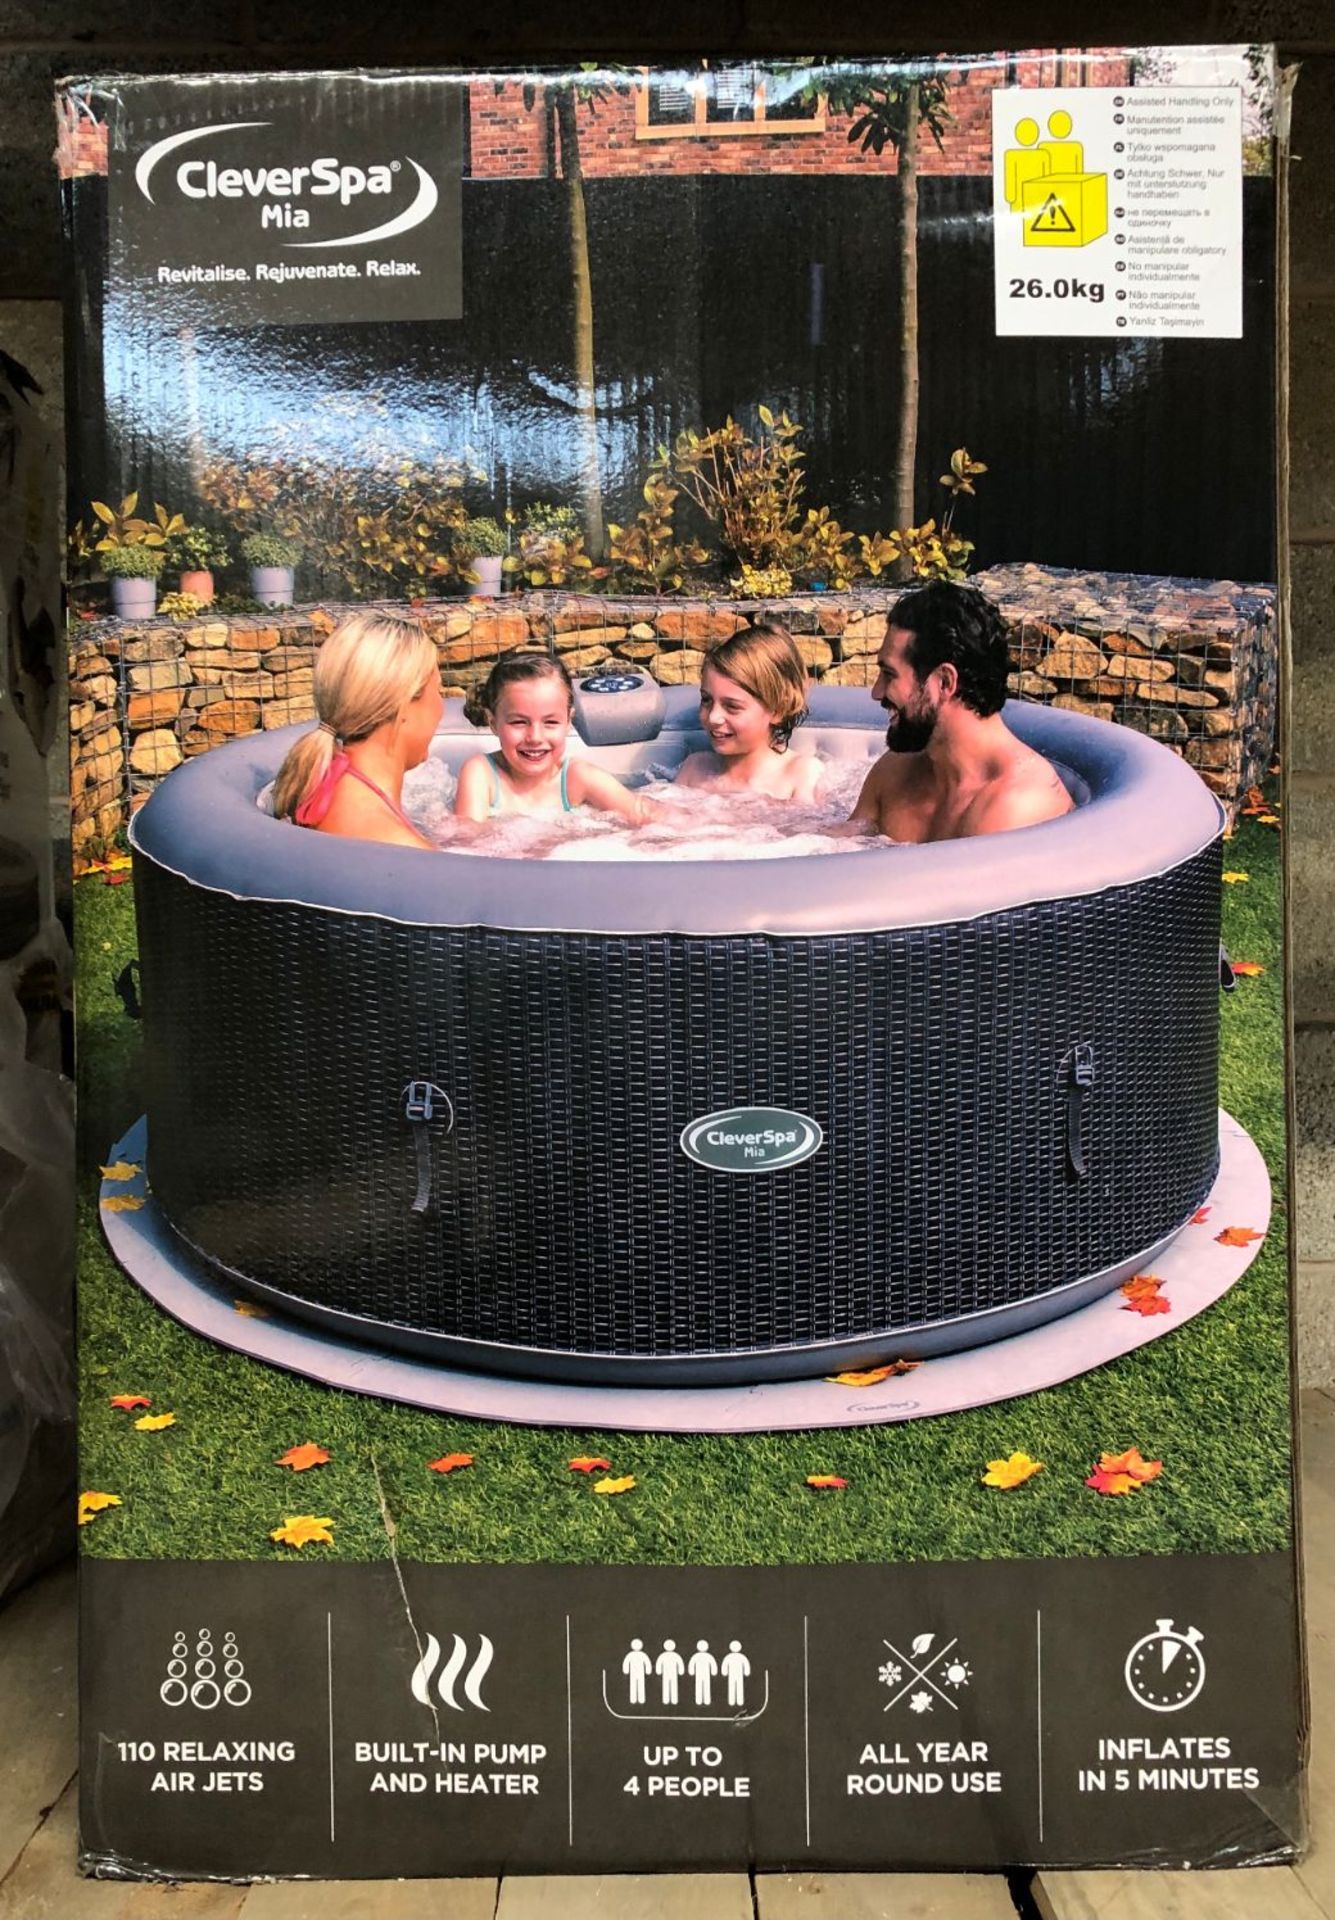 1 x CLEVERSPA MIA 4 PERSON HOT TUB - RRP £413.7